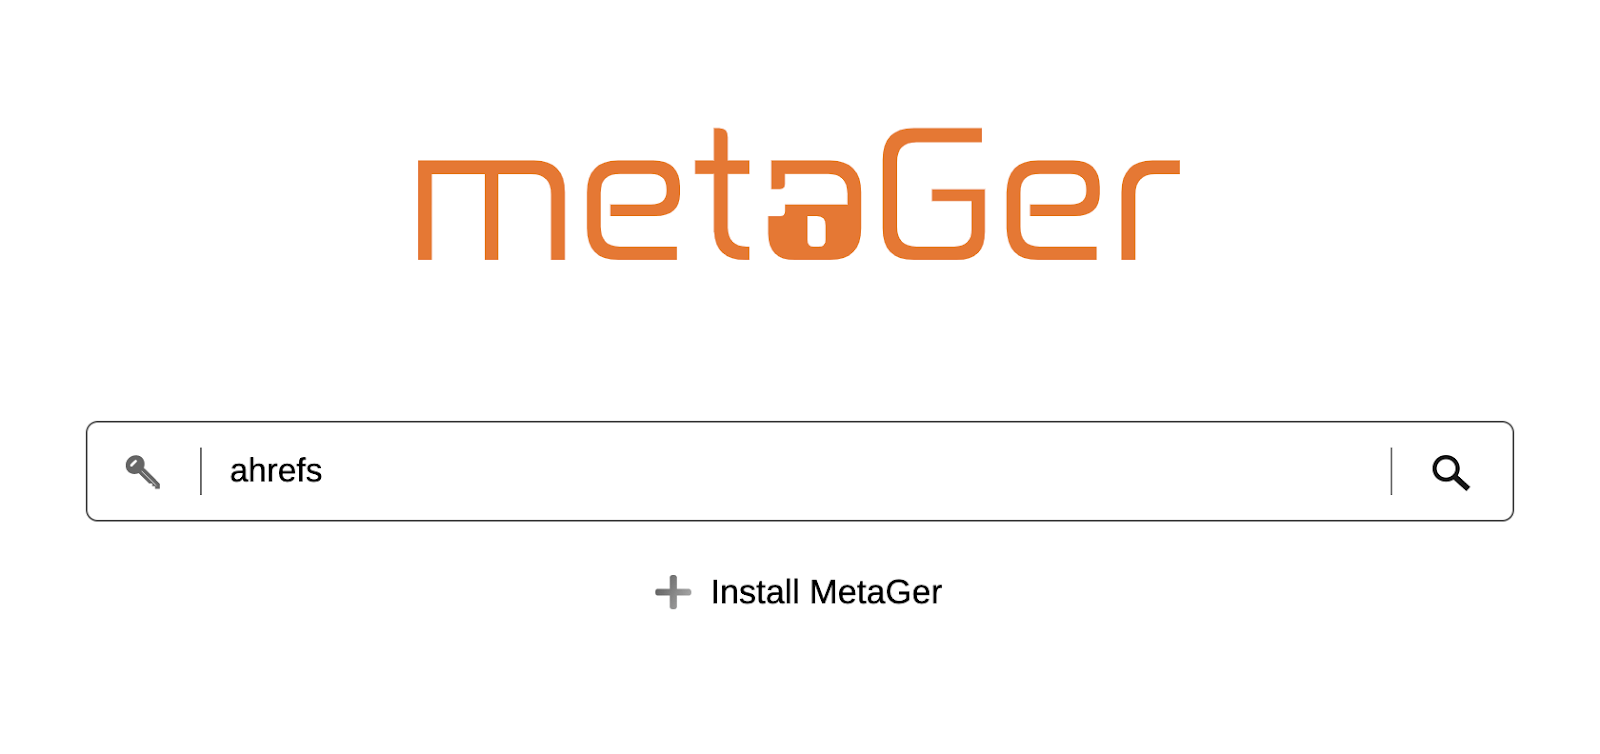 MetaGer's homepage. Search term "ahrefs" in text field